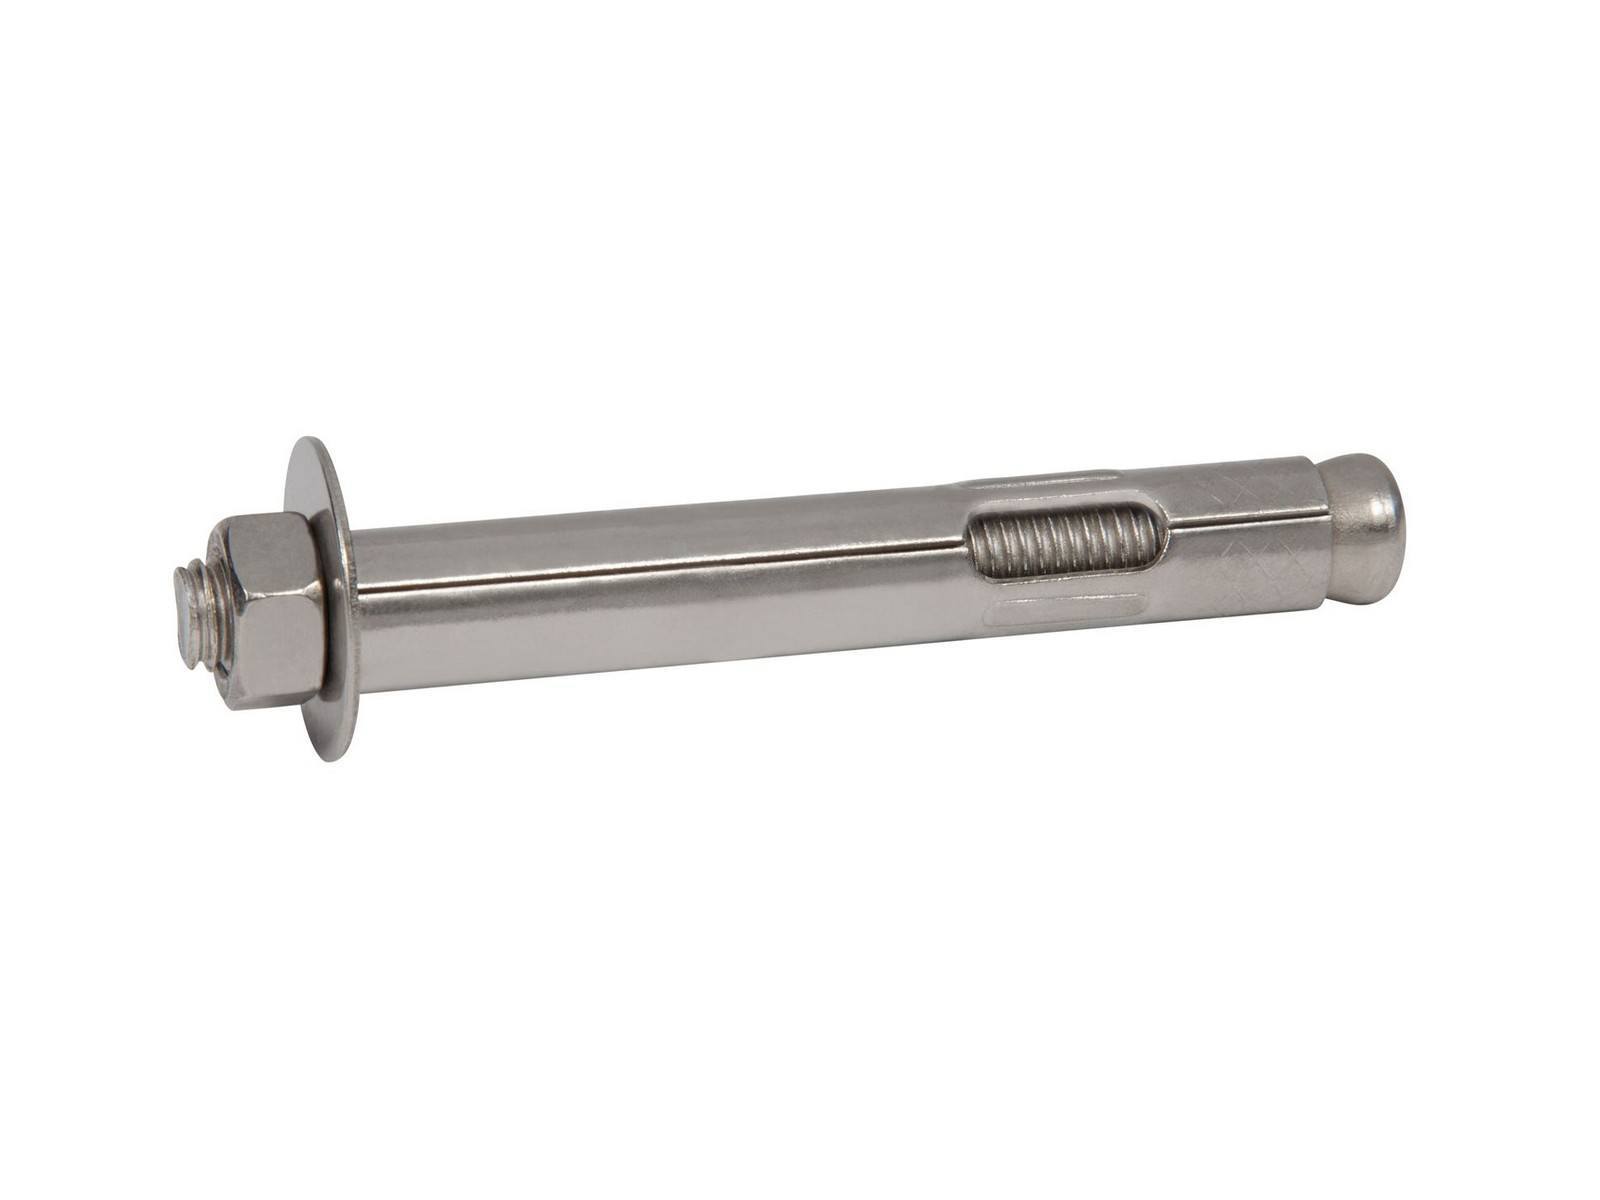 1/2" x 6" 304 Stainless Steel Hex Sleeve Anchor, 25/Box